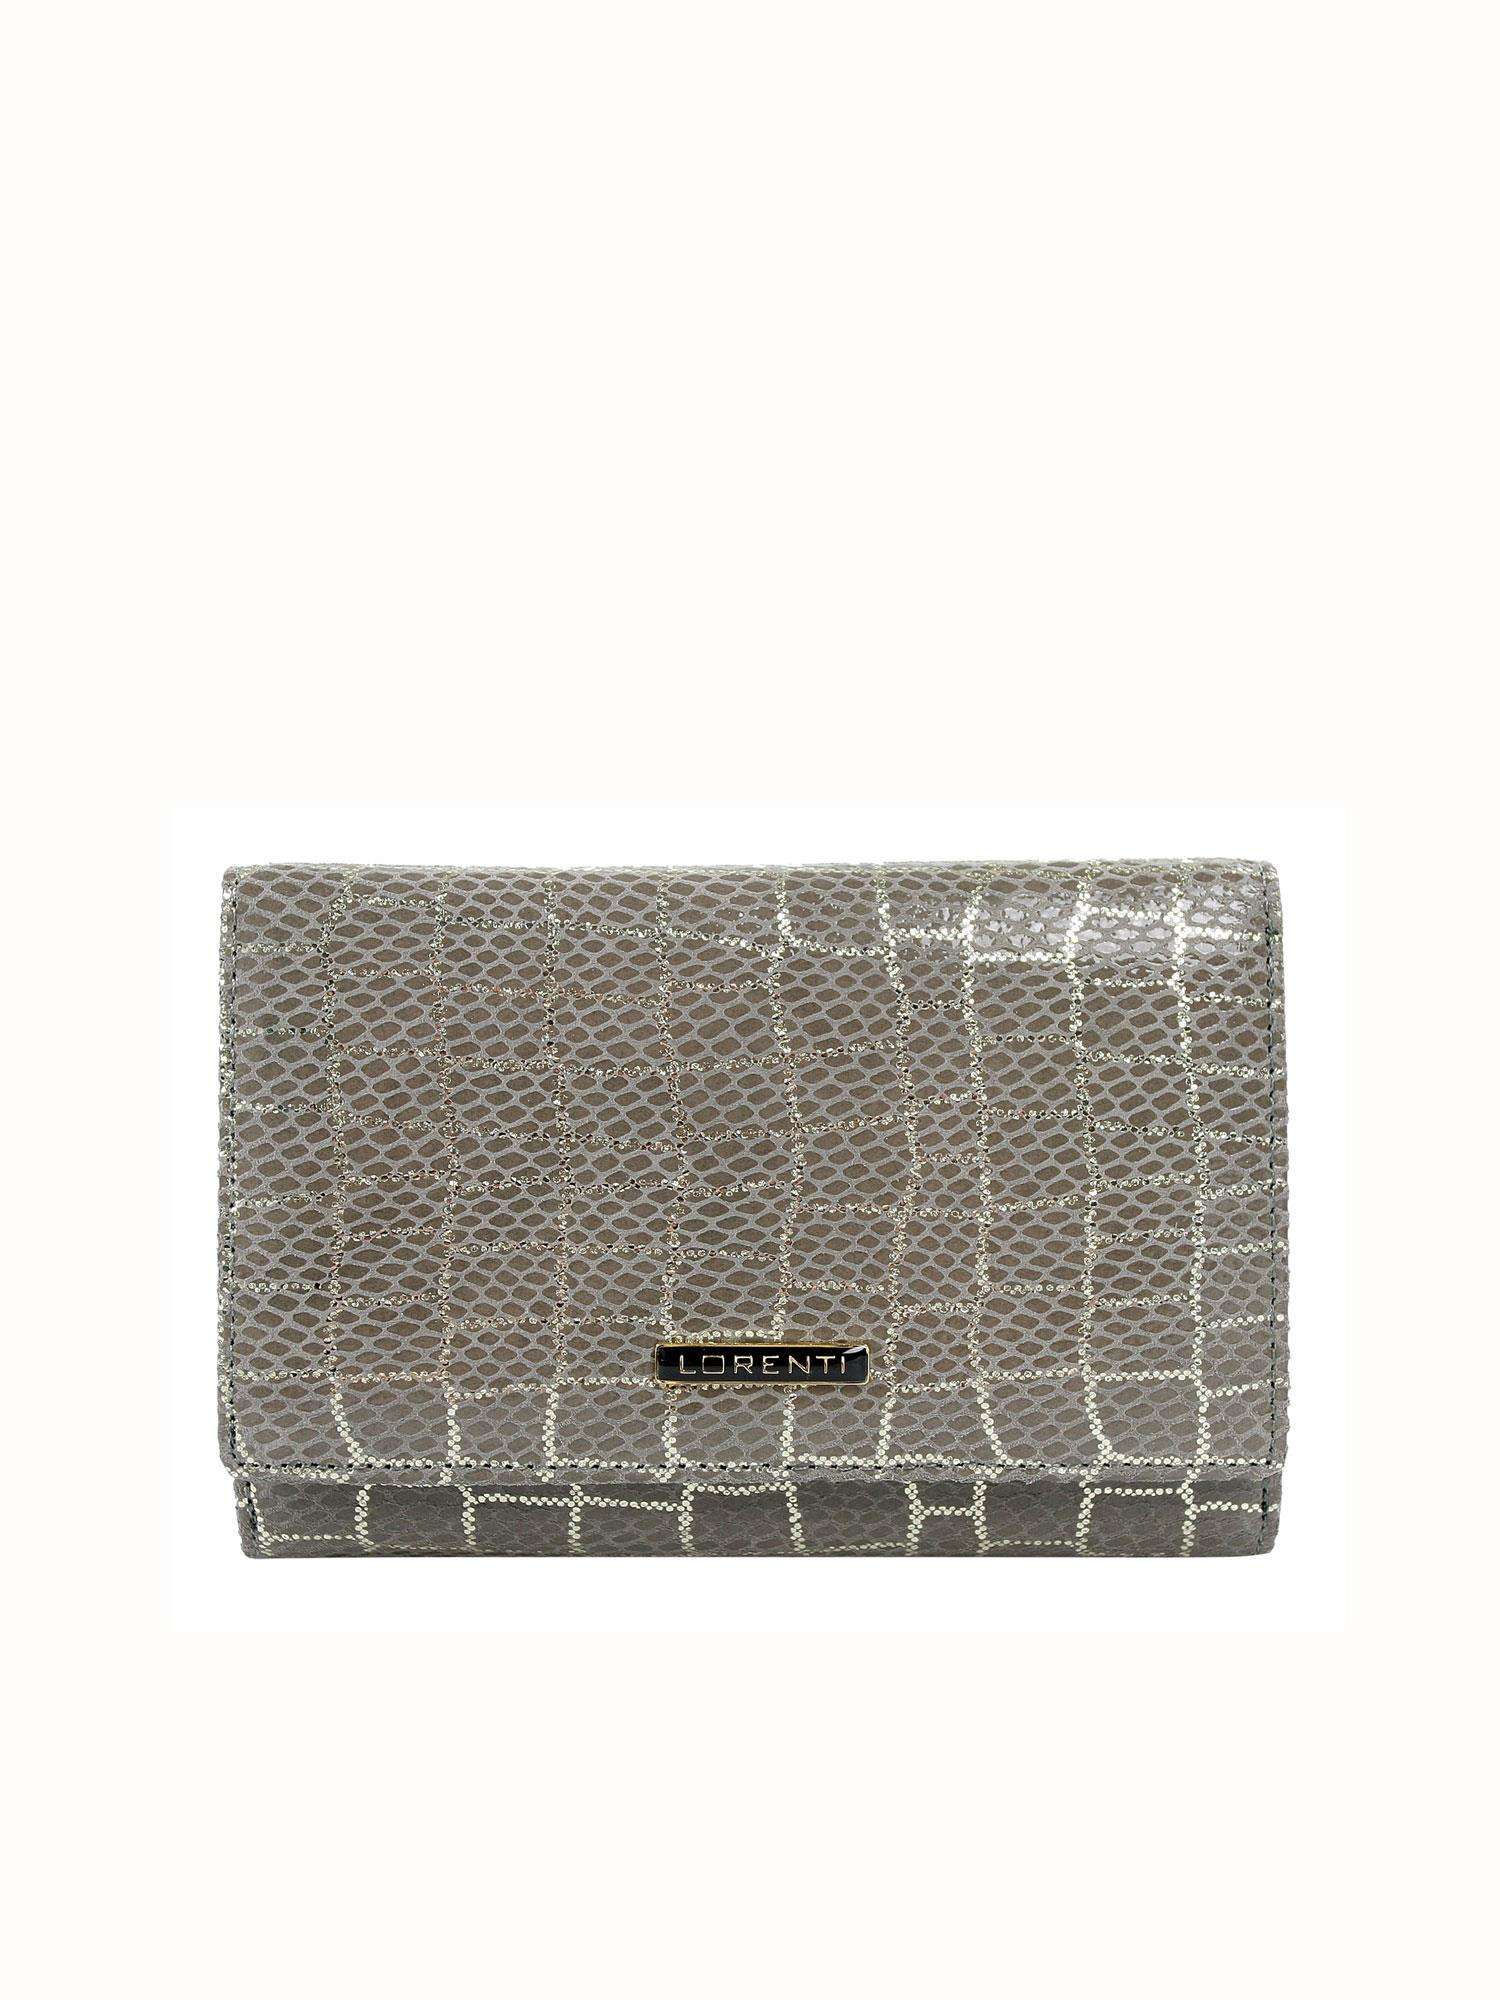 Women's grey horizontal wallet made of natural leather